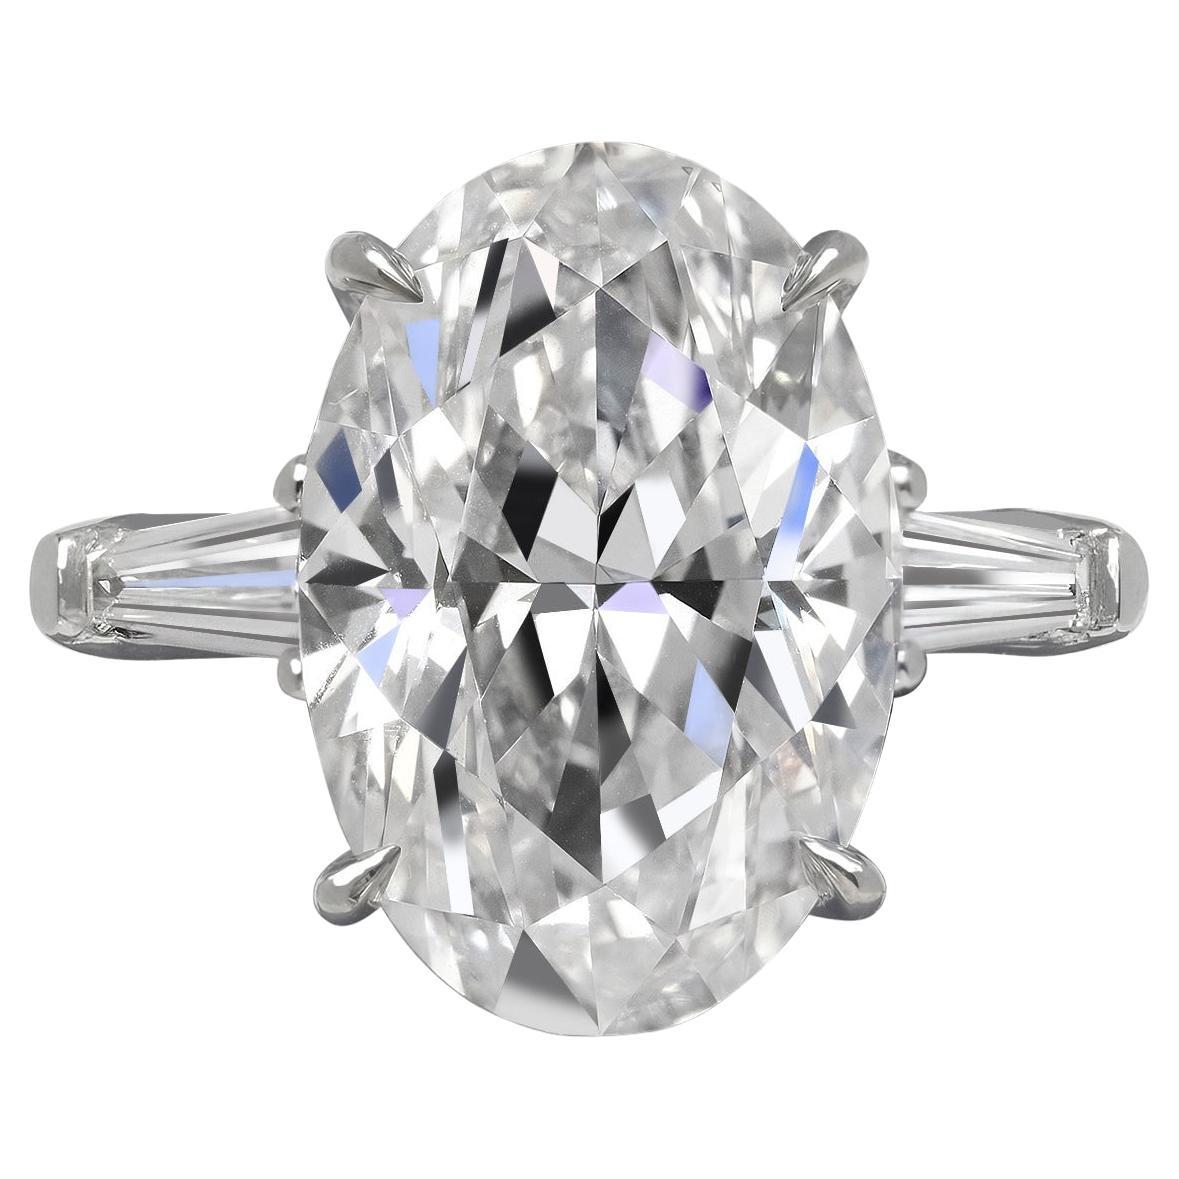 VVS2 GIA Certified 4.22 Carat Oval Diamond Solitaire Ring